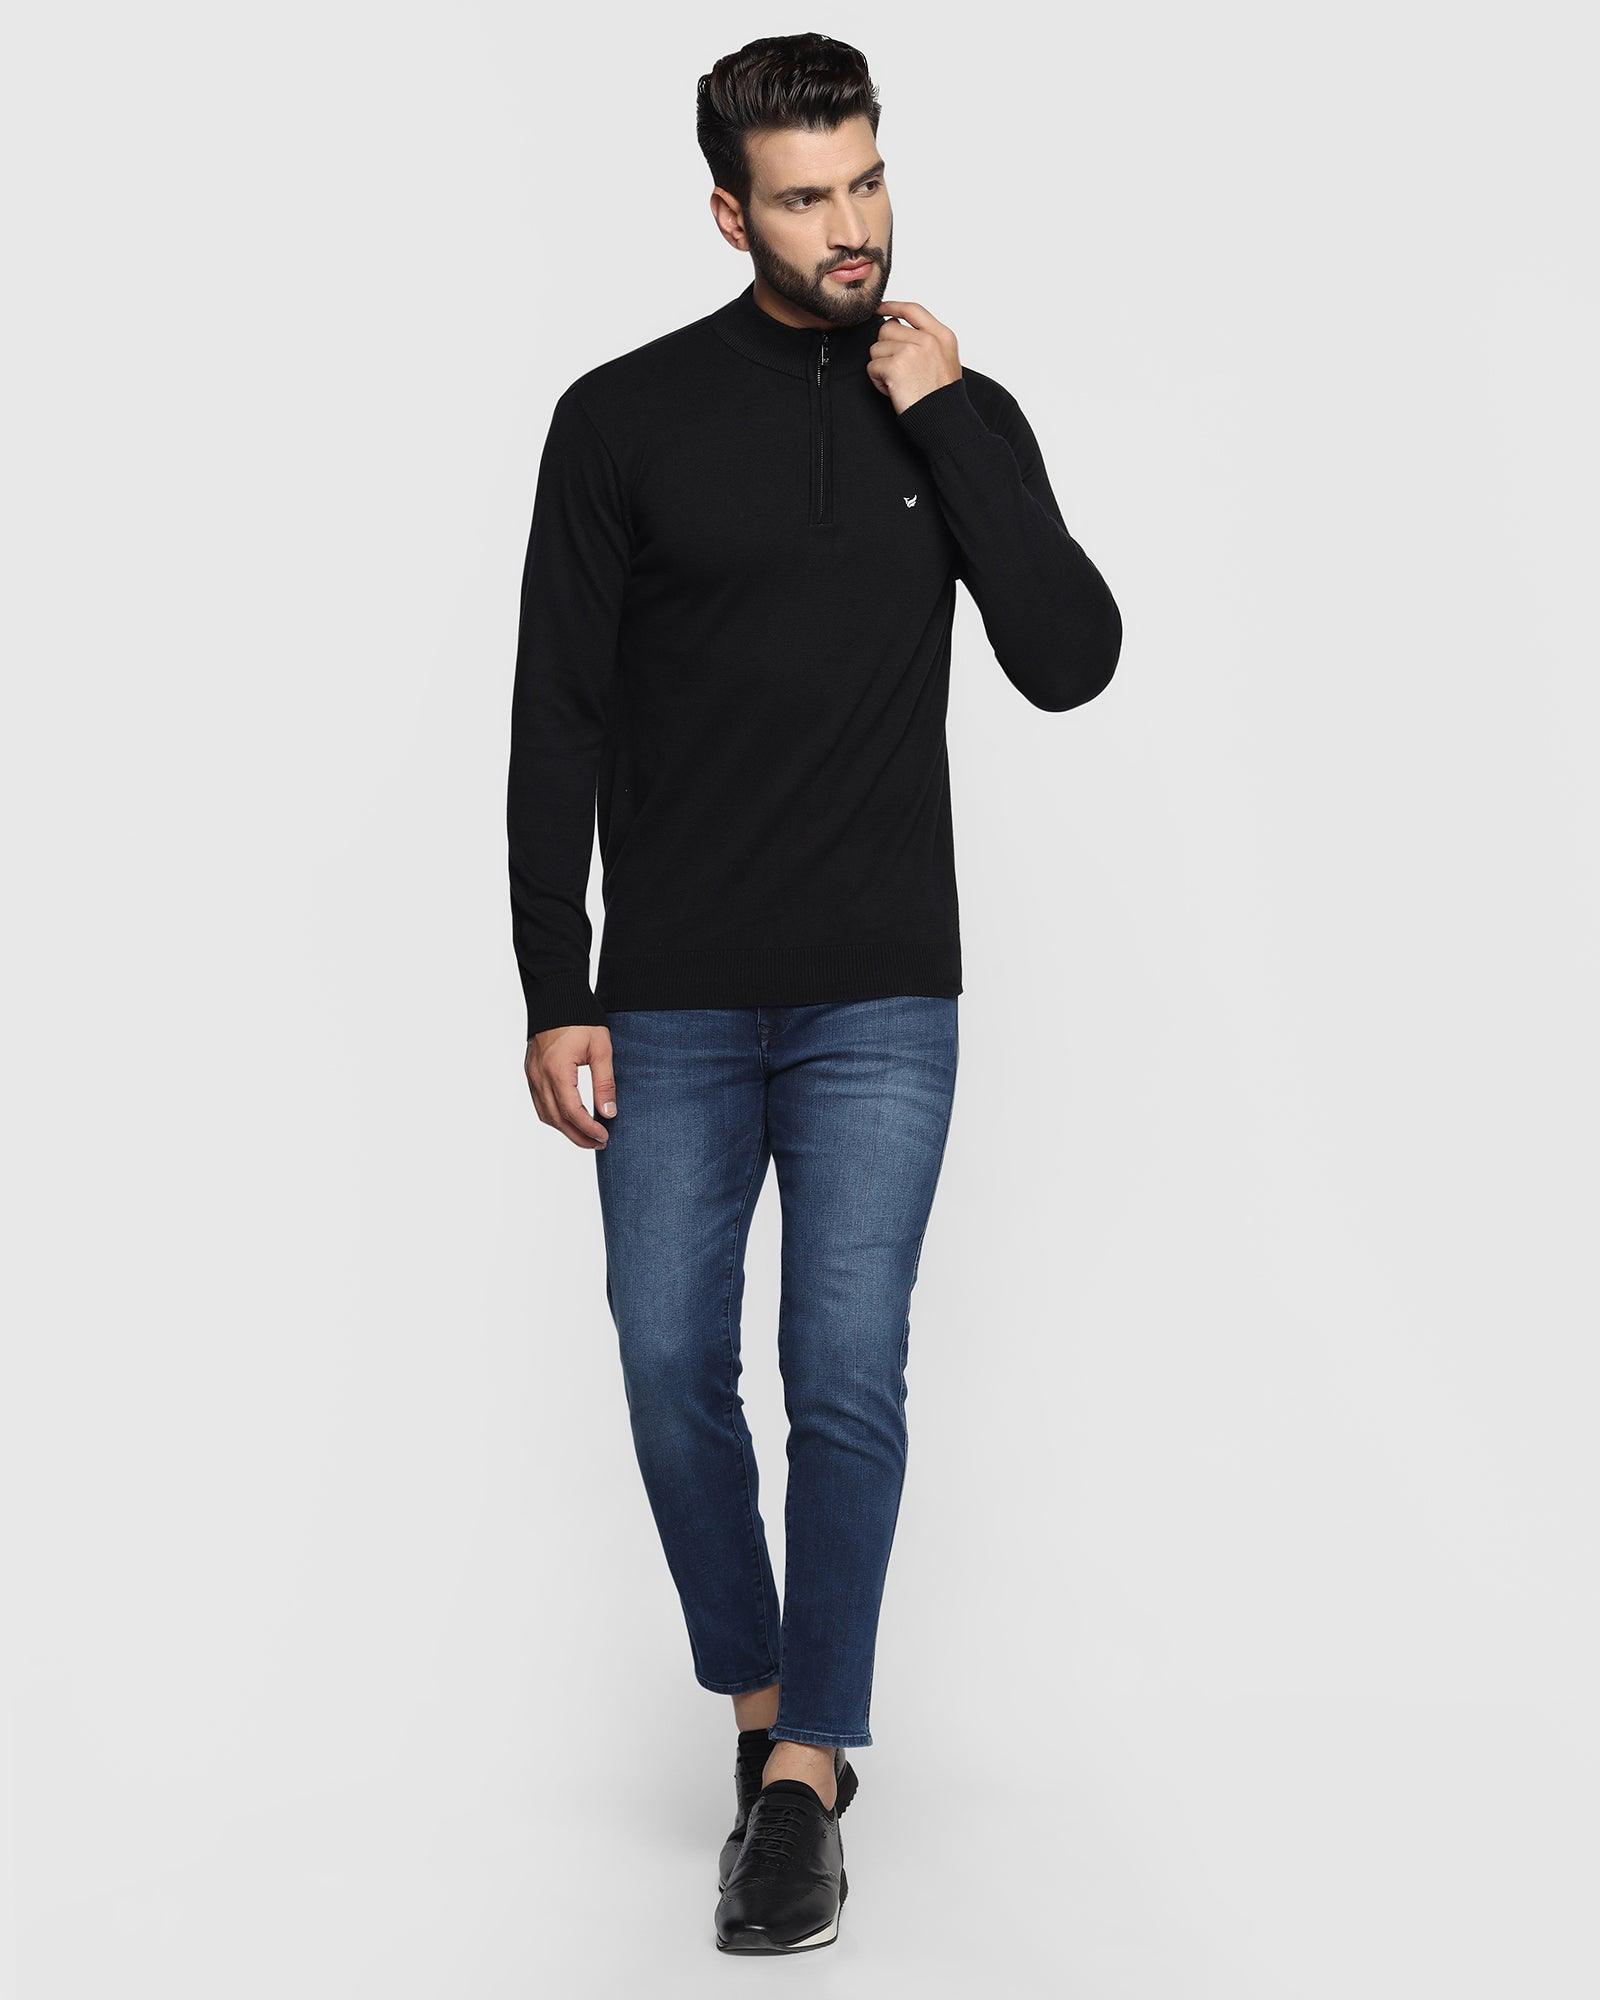 Stylized Collar Black Solid Sweater - Denver